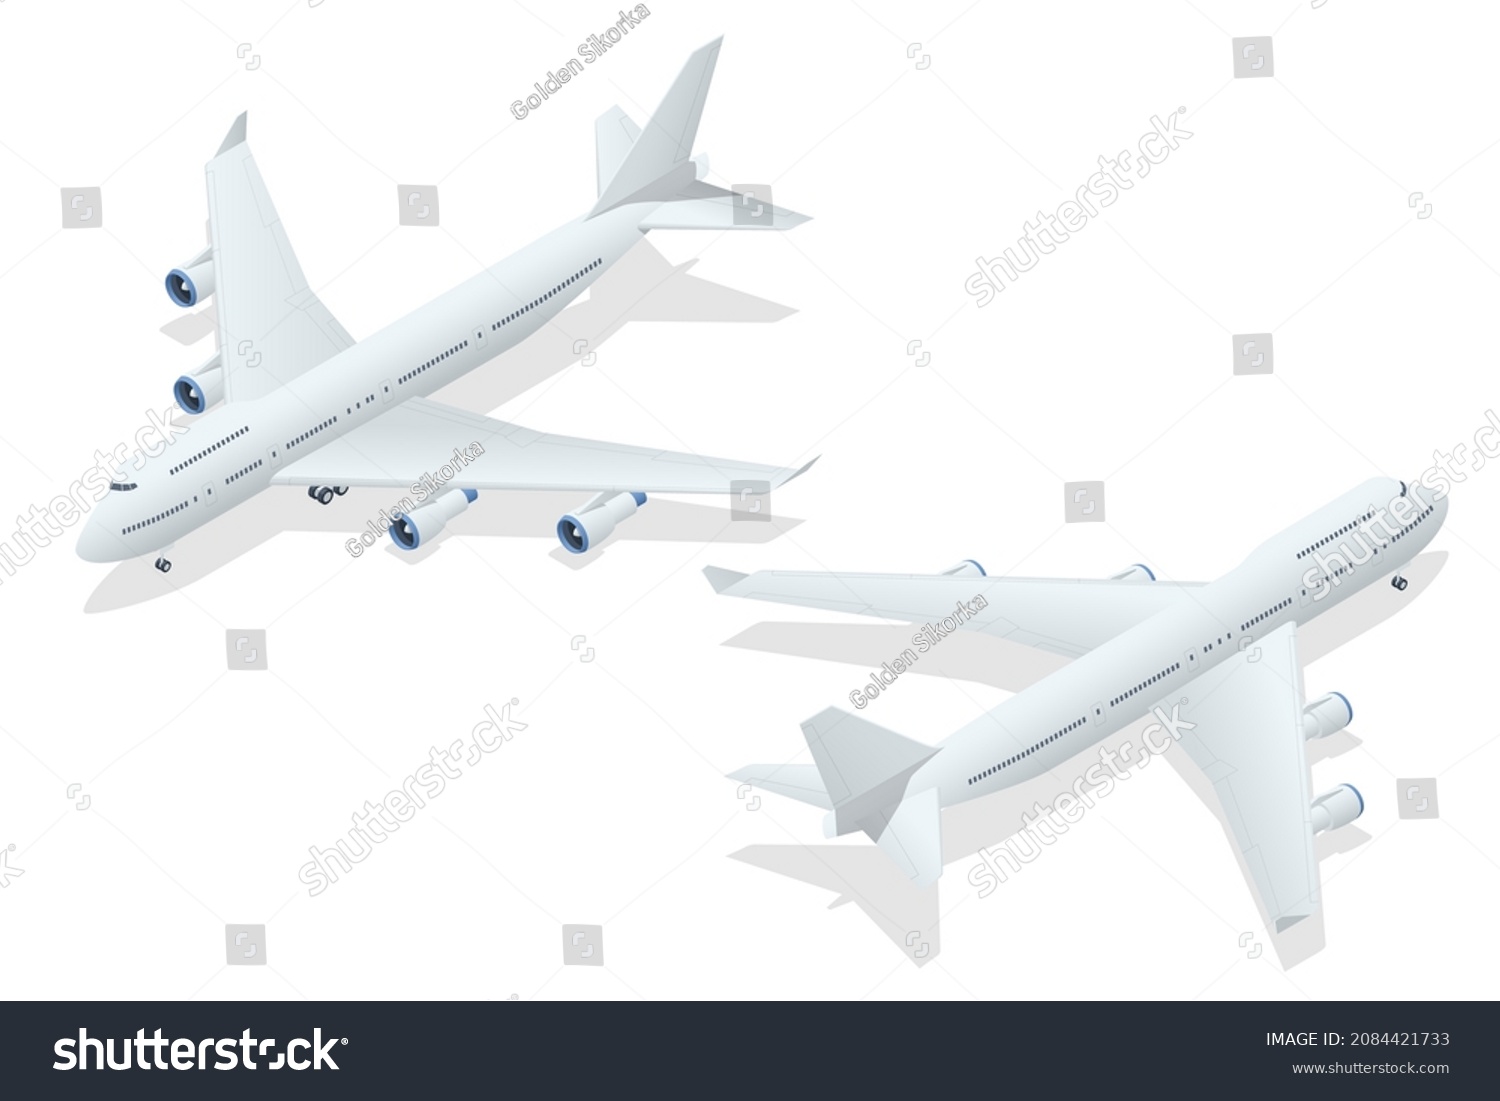 SVG of Isometric Airplanes on Blue Background. Industrial Blueprint of Airplane. Airbus Industries Airplane B-747 super jumbo large wide body passenger svg